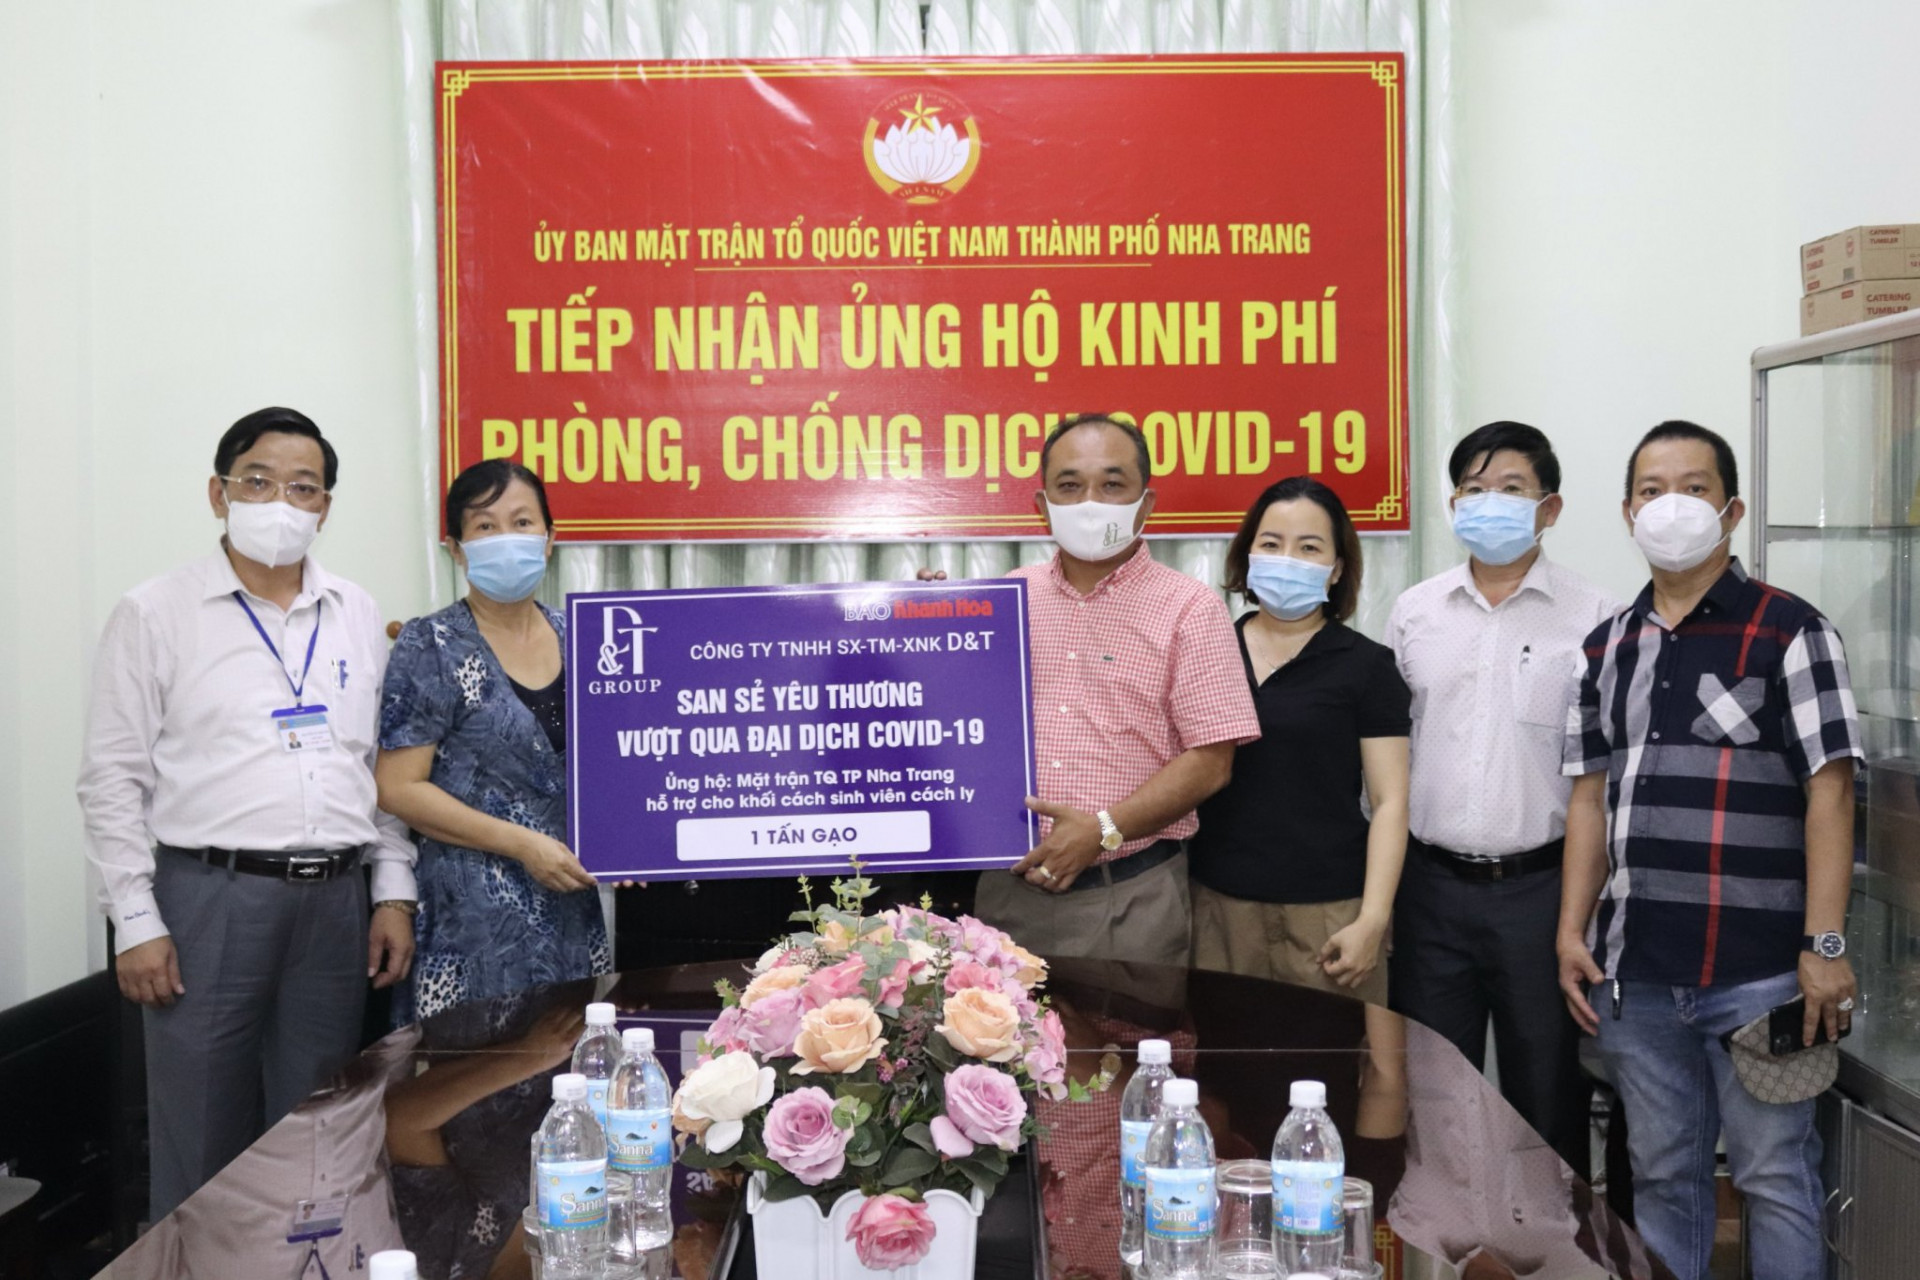 Delegation visiting and offering gifts at Nha Trang City’s Vietnam Fatherland Front Committee